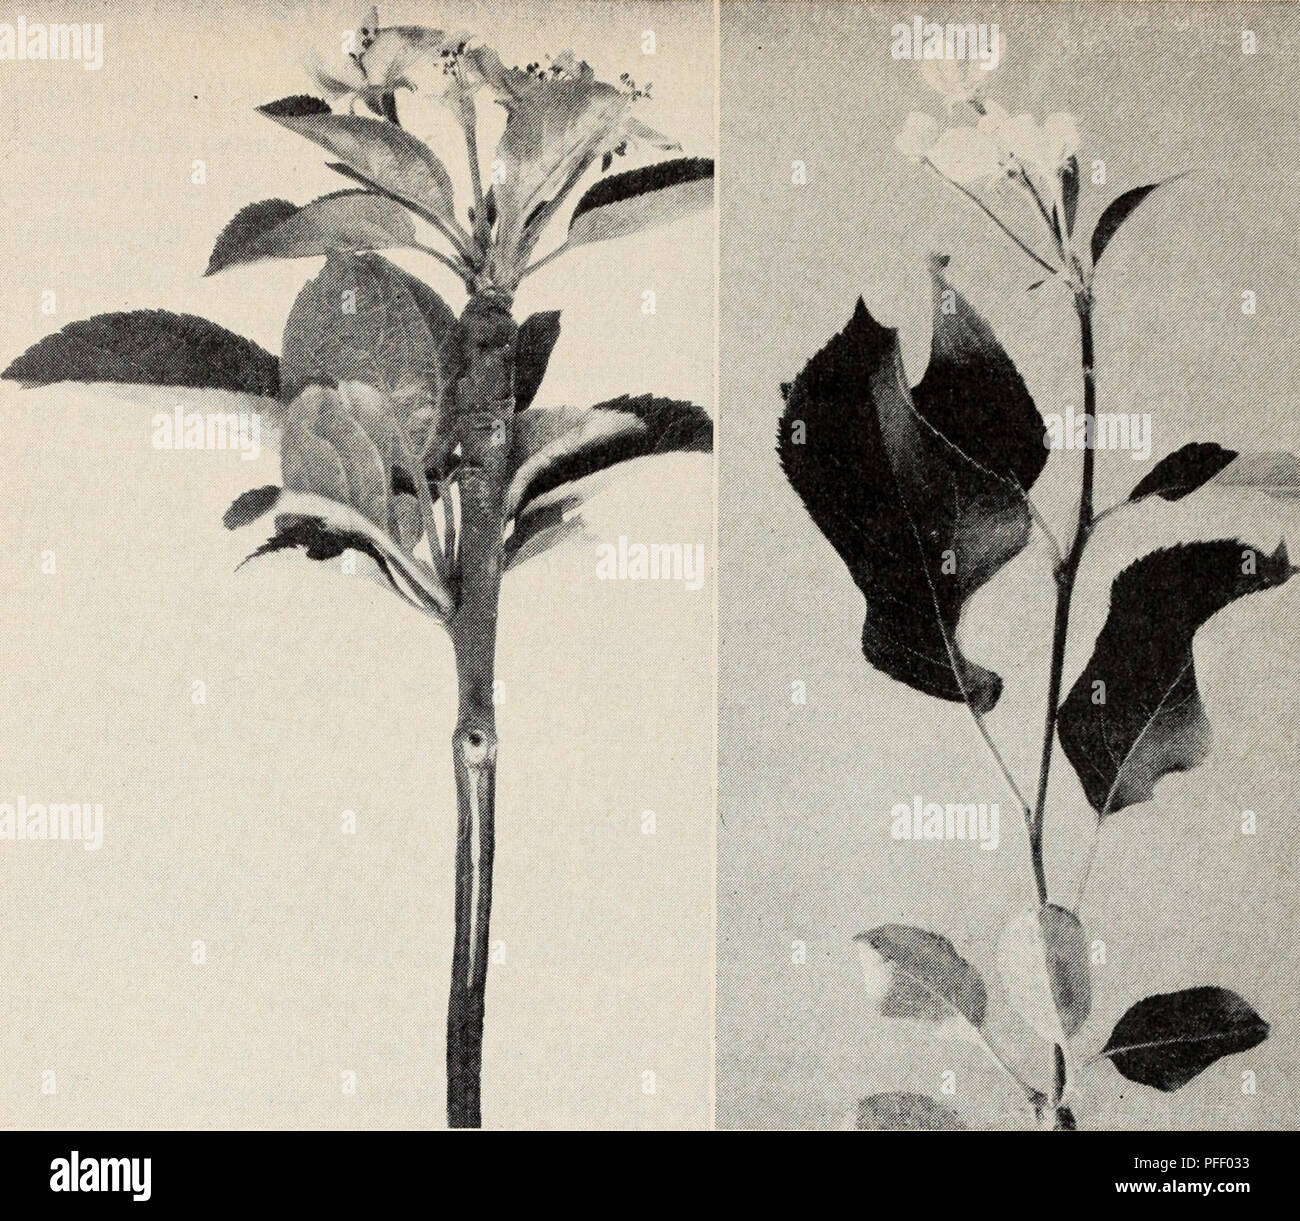 . Deciduous orchards in California winters. Fruit-culture; Plants. Fig. 8. Left: normal twig-terminal blossom cluster of Red Canada apple, just open on July 22, 1930, after a warm winter, above the winter fogs in Berkeley. Right: an abnormal cluster at the end of a rather long, leafy shoot. berian crabs, Malus baccata, and com- mon apples. A few varieties of apples, such as Wealthy, are from crosses be- tween crabapples and some common ap- ple, and tend to have fairly short chilling requirements, given by Malus baccata. Trees of the varieties Hume, Wealthy, Early Mcintosh, Winter Banana, White Stock Photo